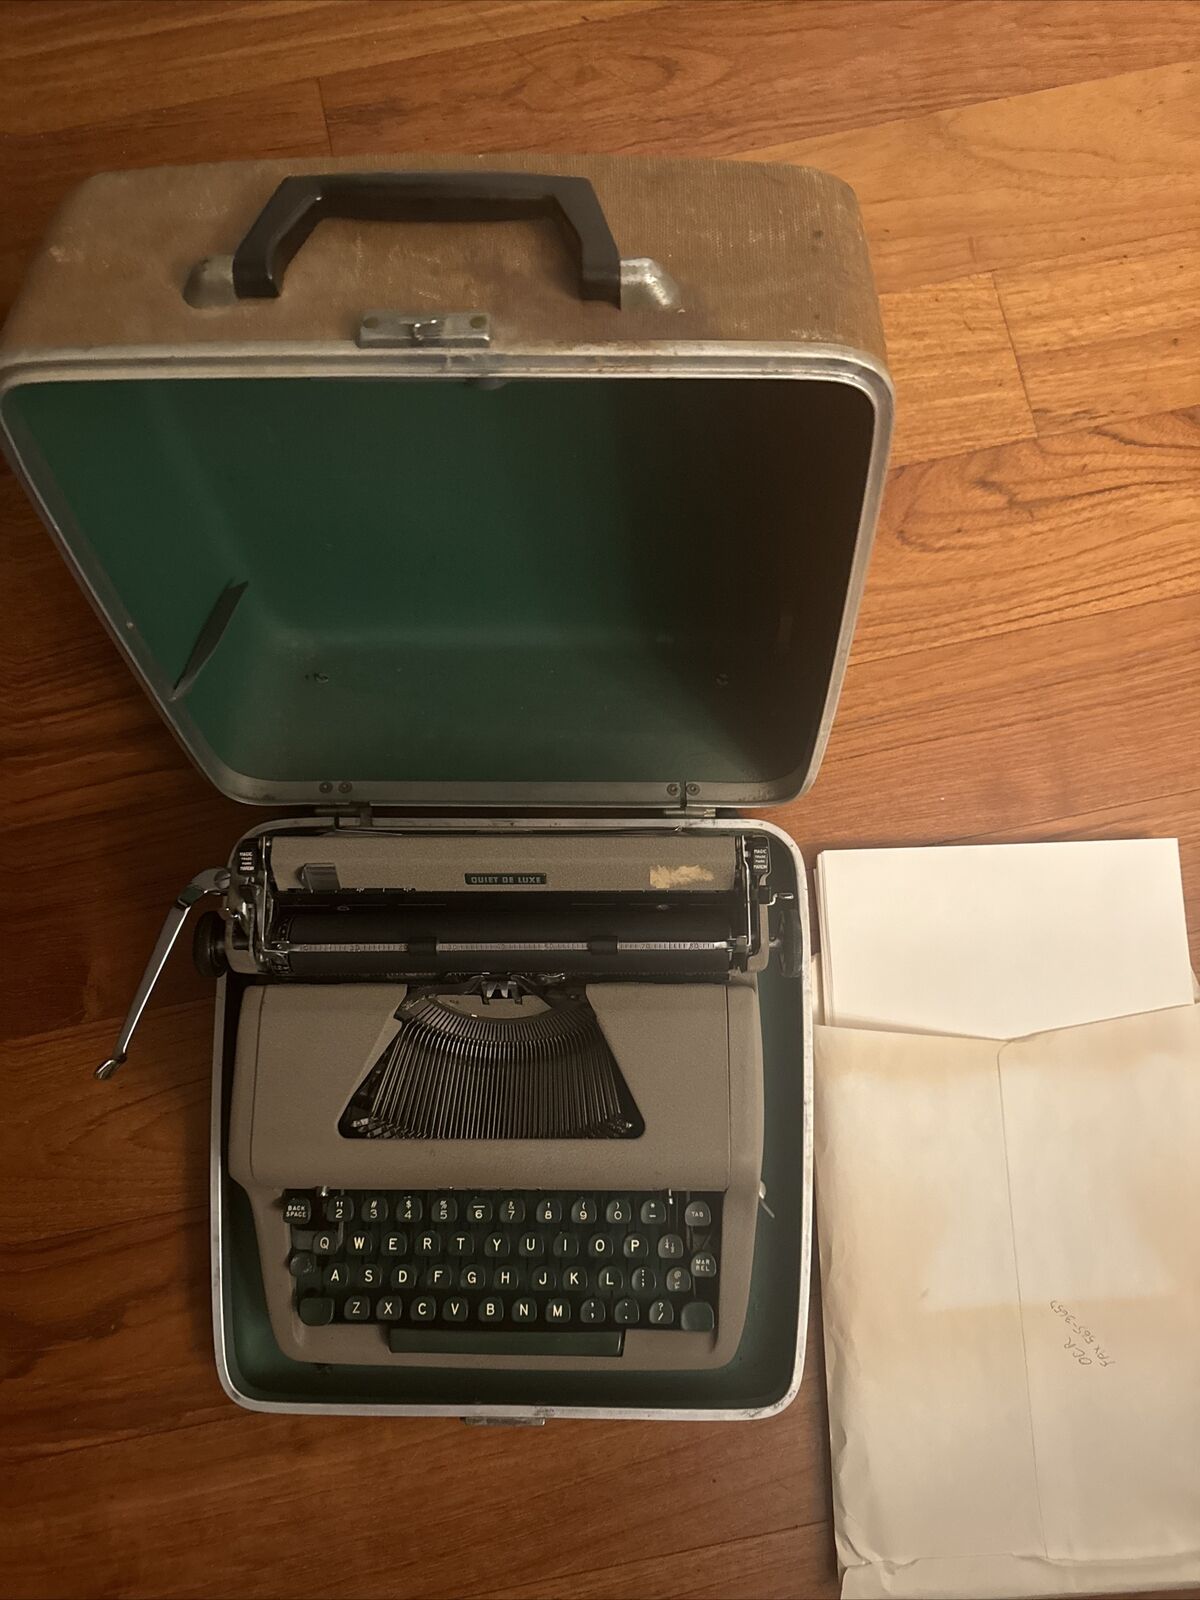 Royal Quiet DeLuxe Manual Typewriter Portable Hard Case W/ Paper Sheets Works